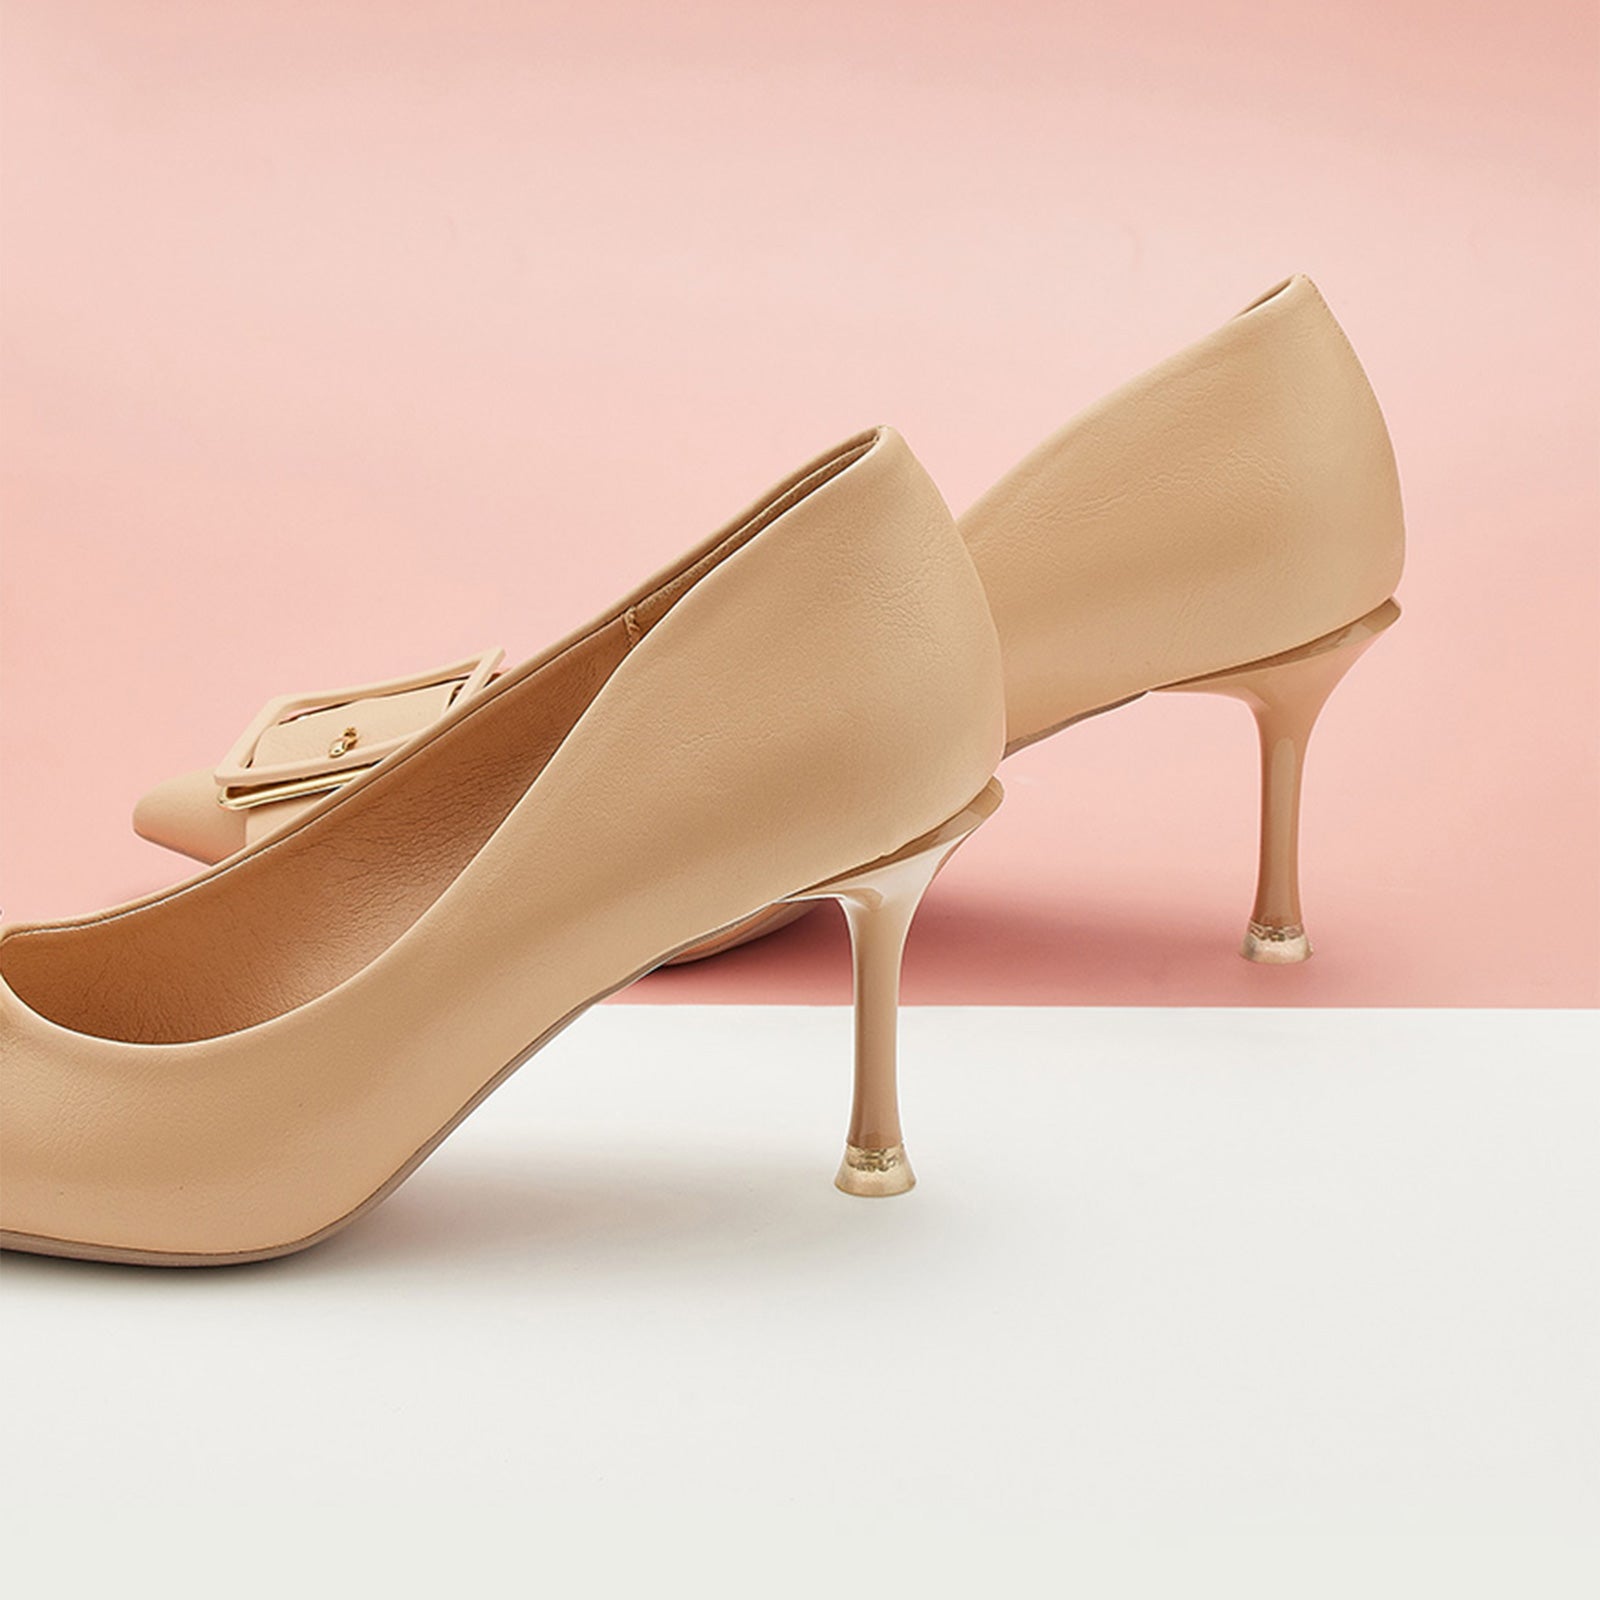 Beige Elegant Pumps with a square buckle, offering a modern and timeless addition to your footwear collection